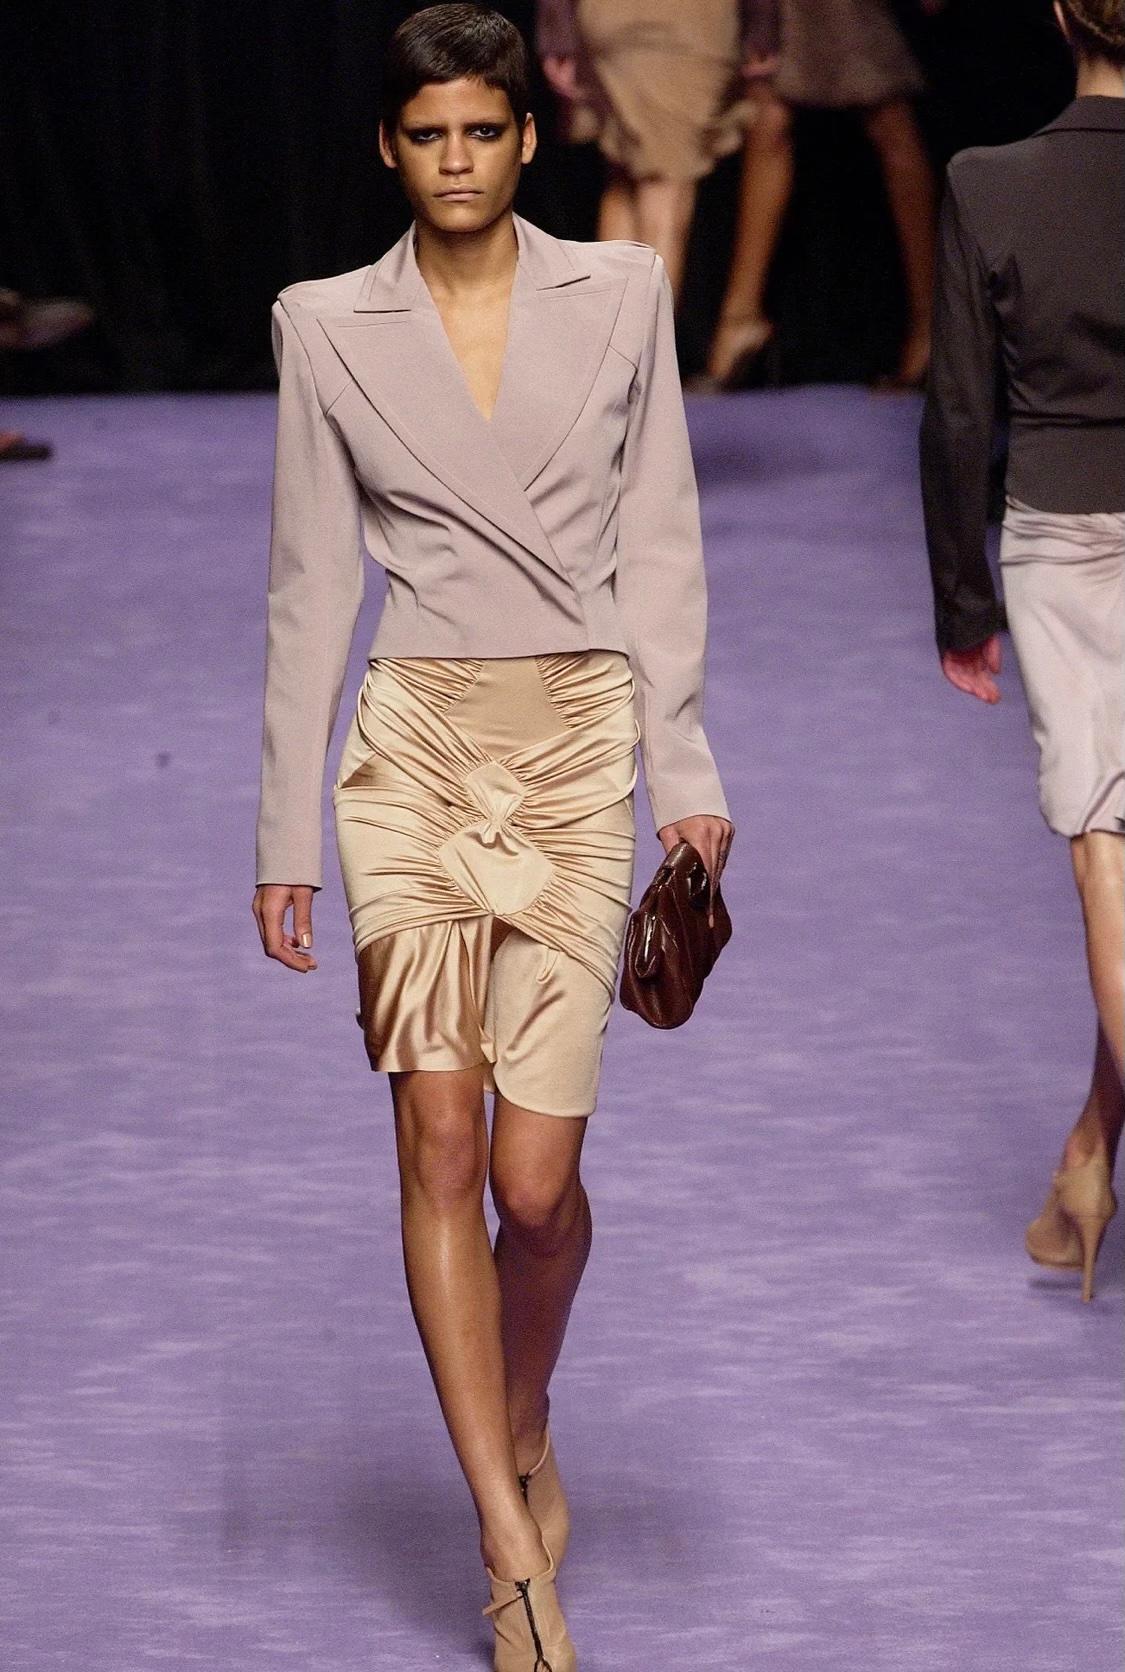 Presenting a dusty lavender stretch viscose blend skirt designed by Tom Ford for Yves Saint Laurent Rive Gauche's Spring/Summer 2003 collection. The beige/taupe version of this skirt debuted on the season's runway as part of look 3 on Omahyra Mota